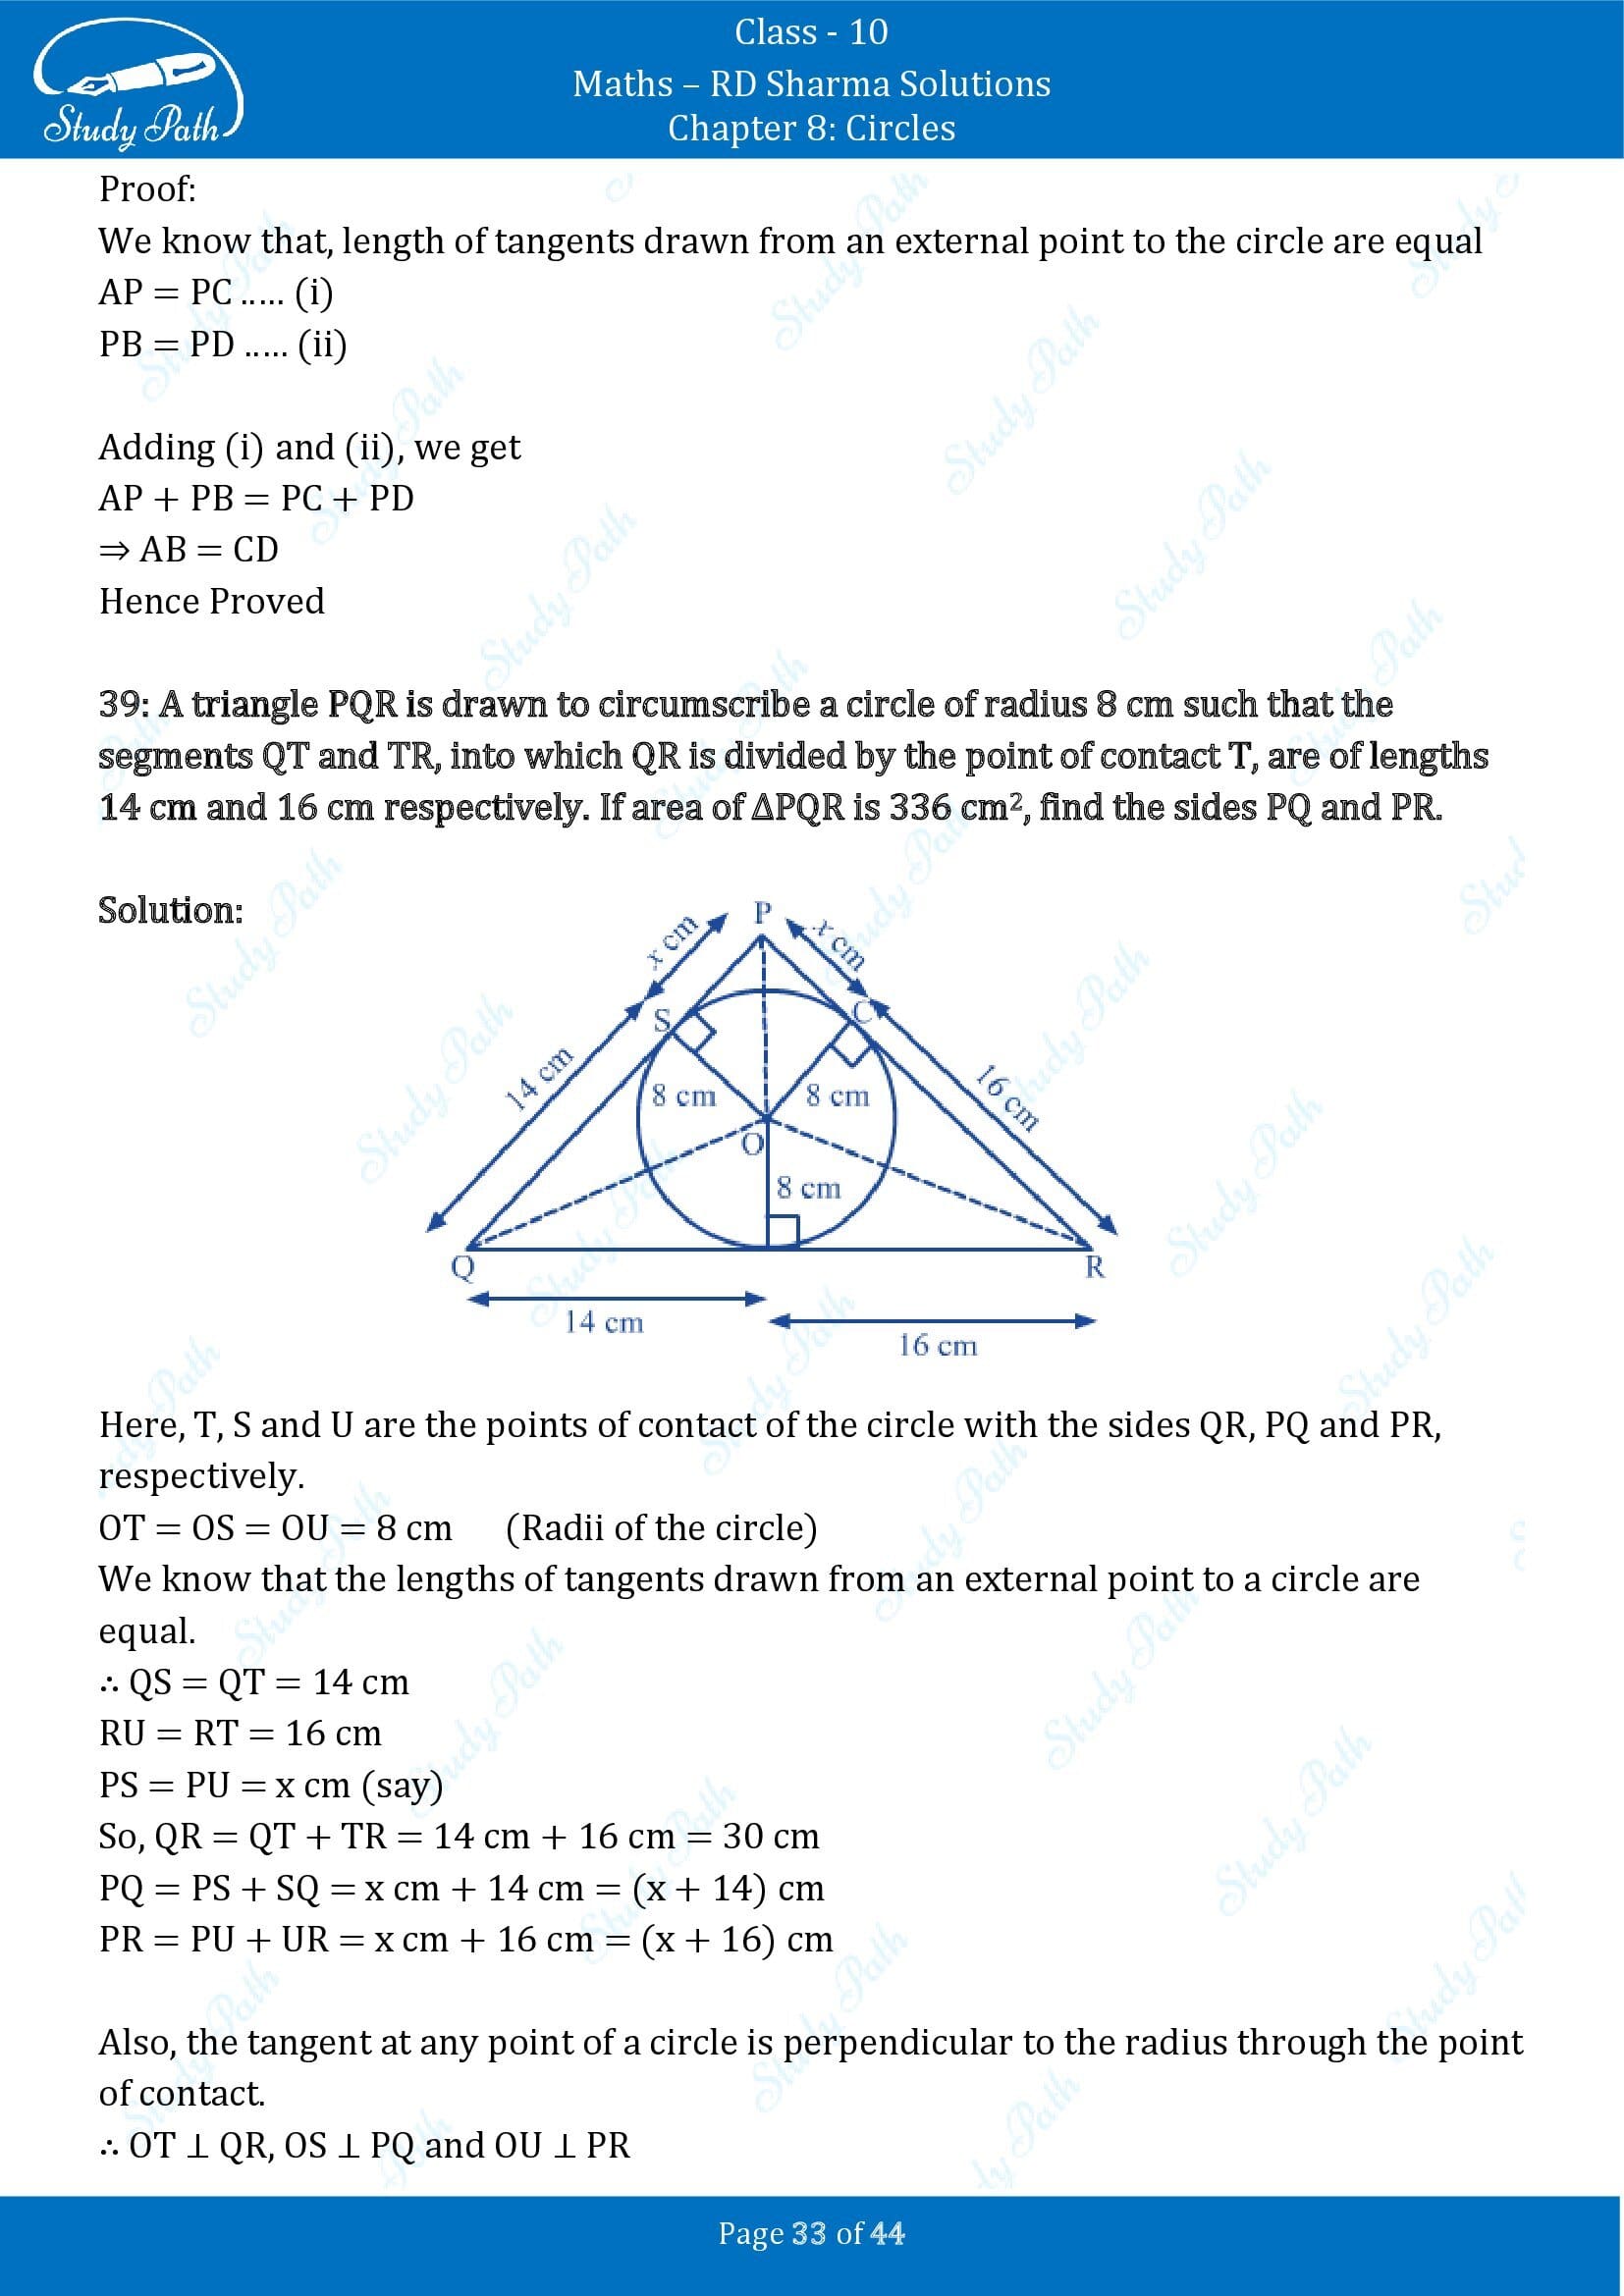 RD Sharma Solutions Class 10 Chapter 8 Circles Exercise 8.2 00033